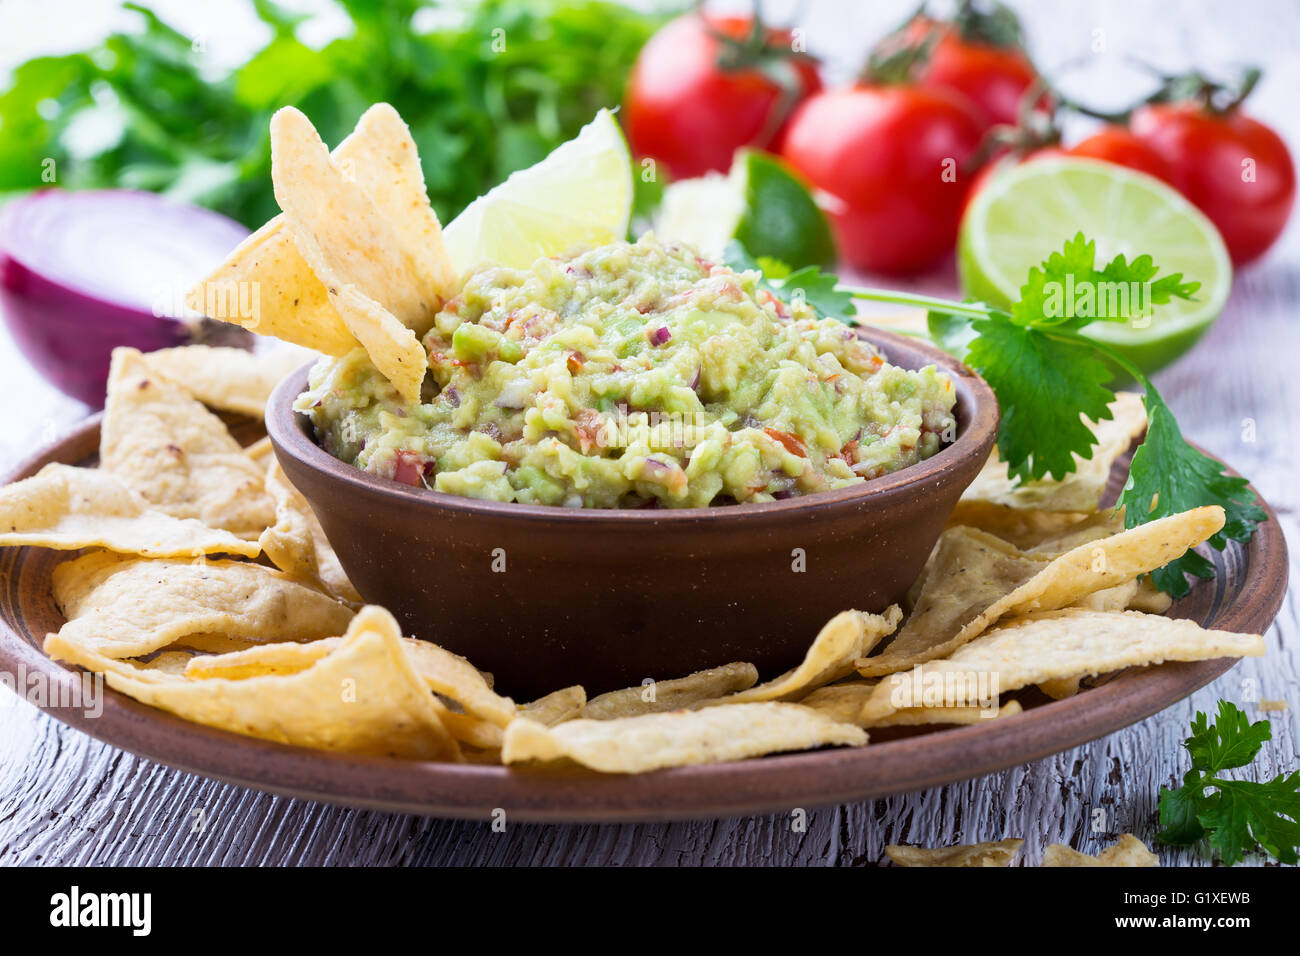 Homemade guacamole sauce and corn chips in ceramic bowl on wooden table, Mexican food Stock Photo